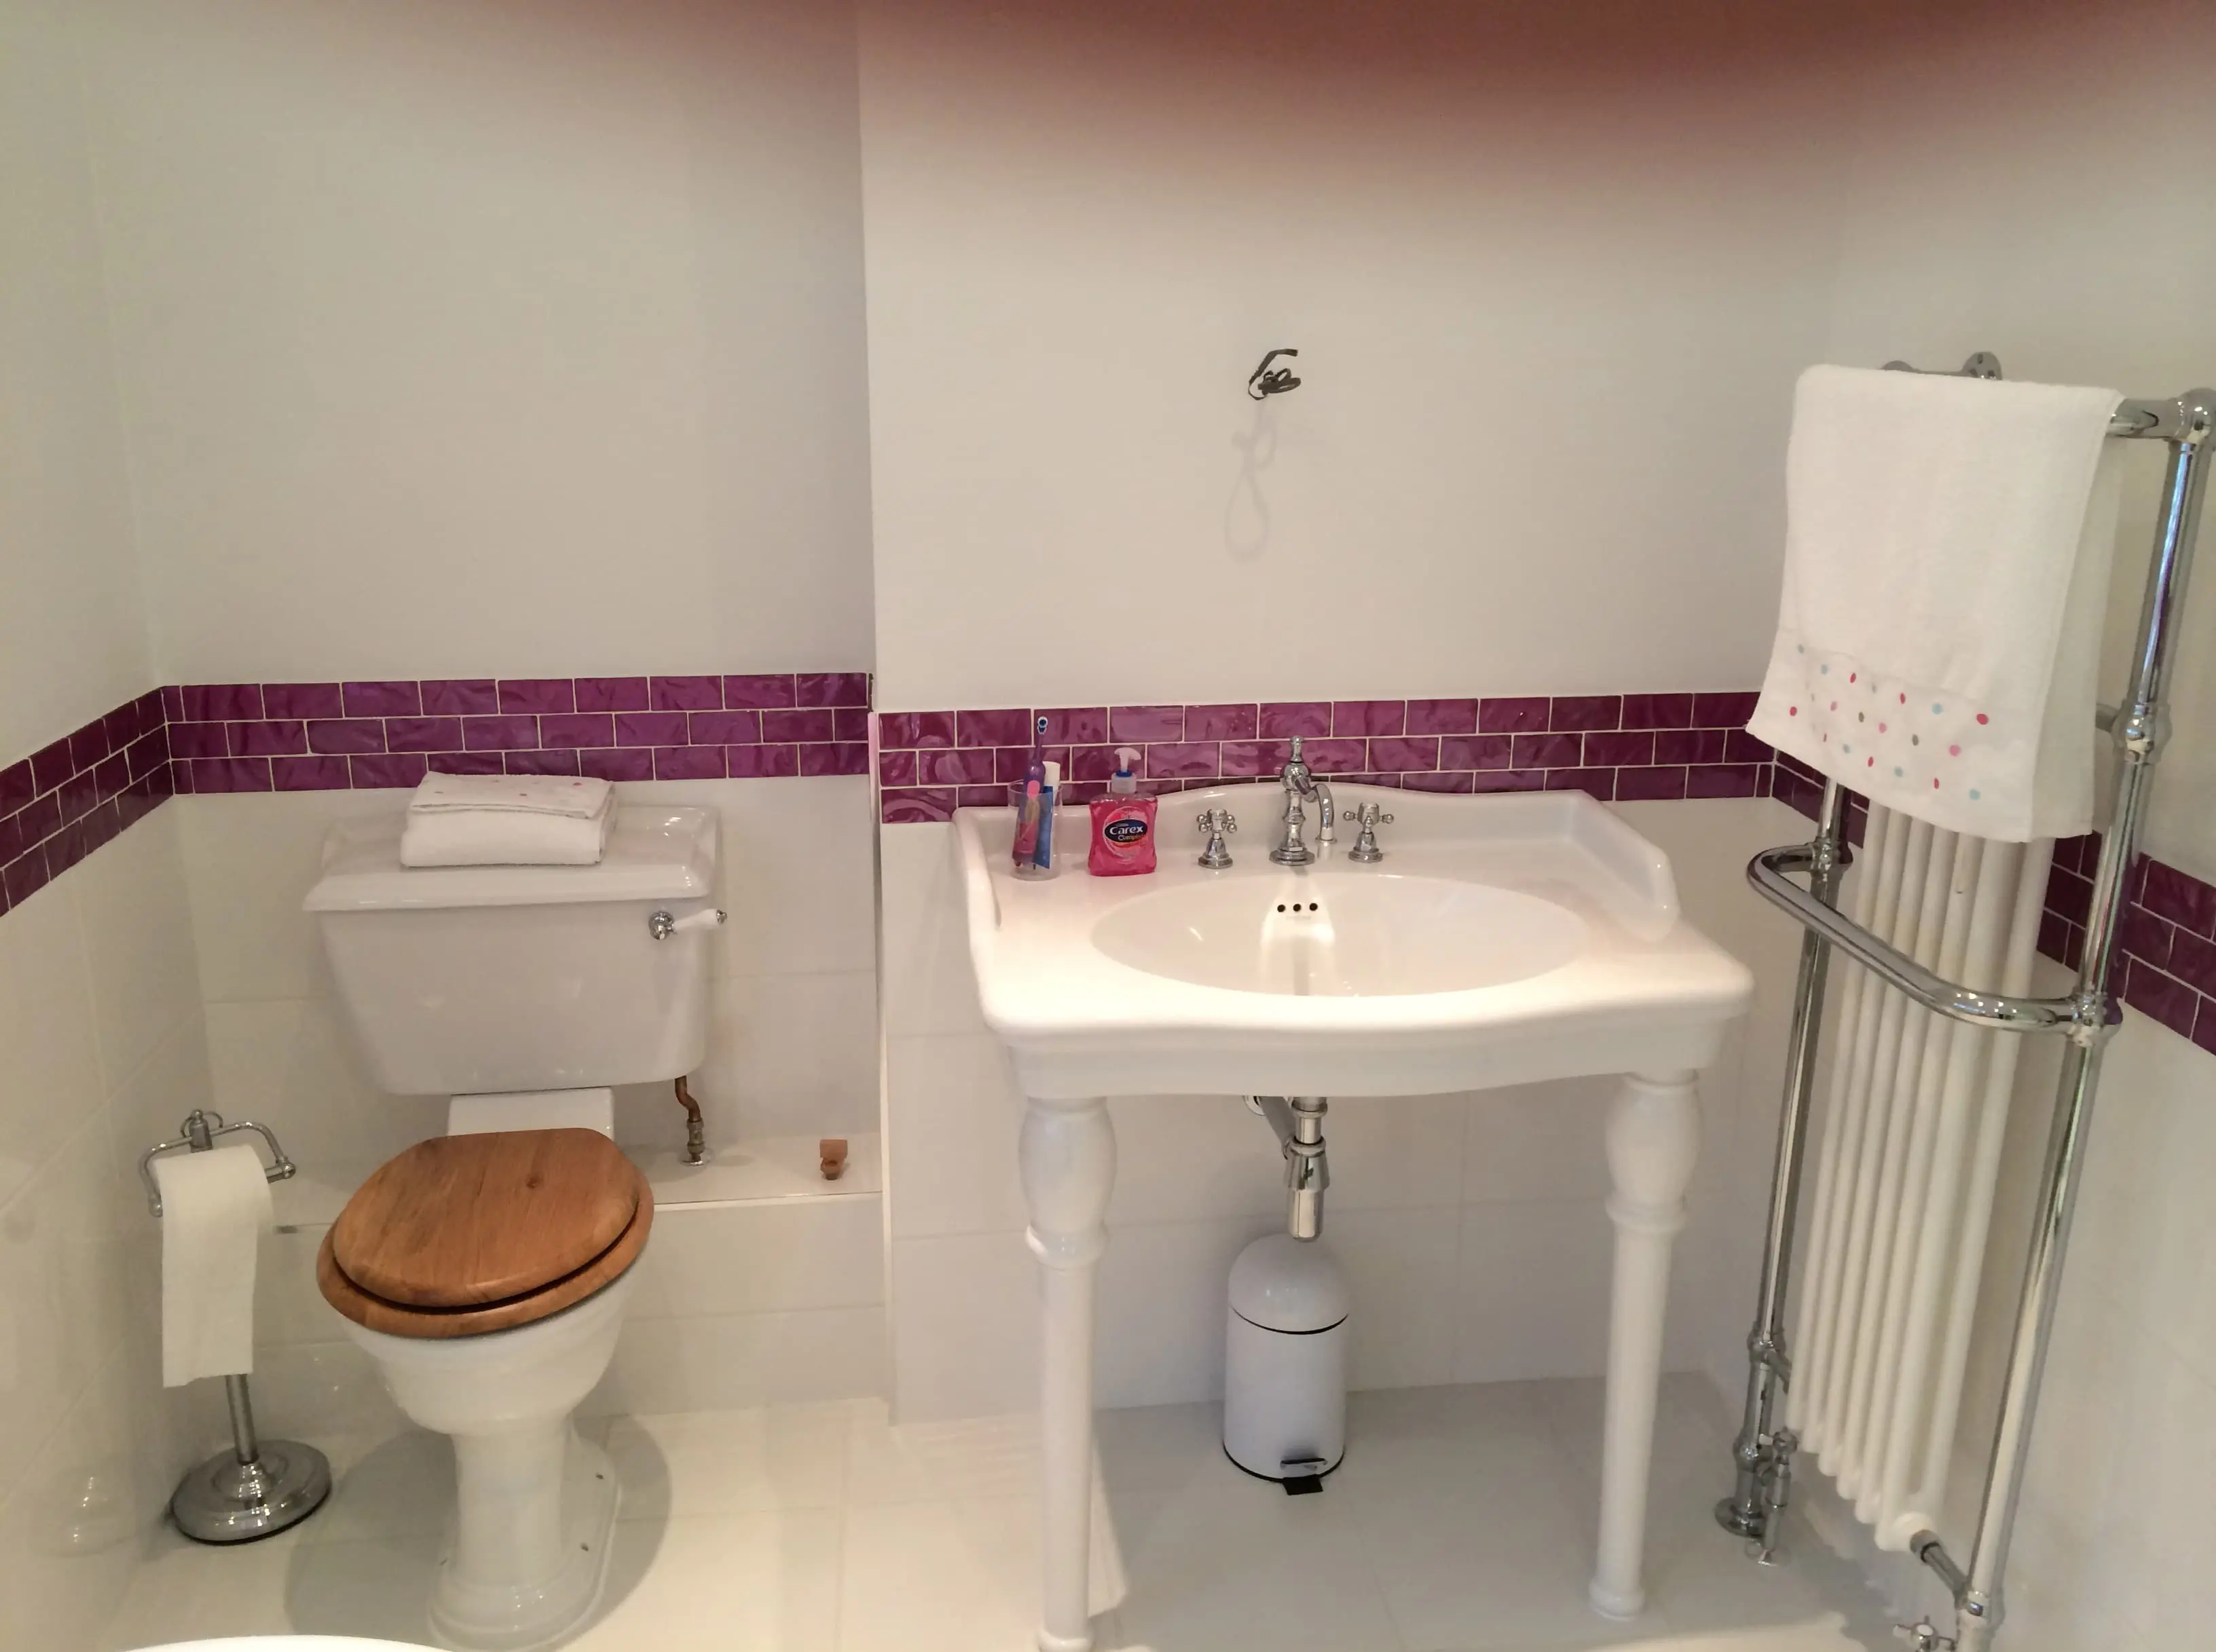 At Plumbing 4 U, we can tailor our tiling services&nbsp;to suit your budget.The team are fully qualified, with over 40 years of experience in the tiling industry, so you can be sure you are in good hands.&nbsp;In addition to tiling, we also offer plumbing and&nbsp;bathroom&nbsp;installations.Why not give us a&nbsp;call today to discuss your requirements for&nbsp;tiling services in Southcote?